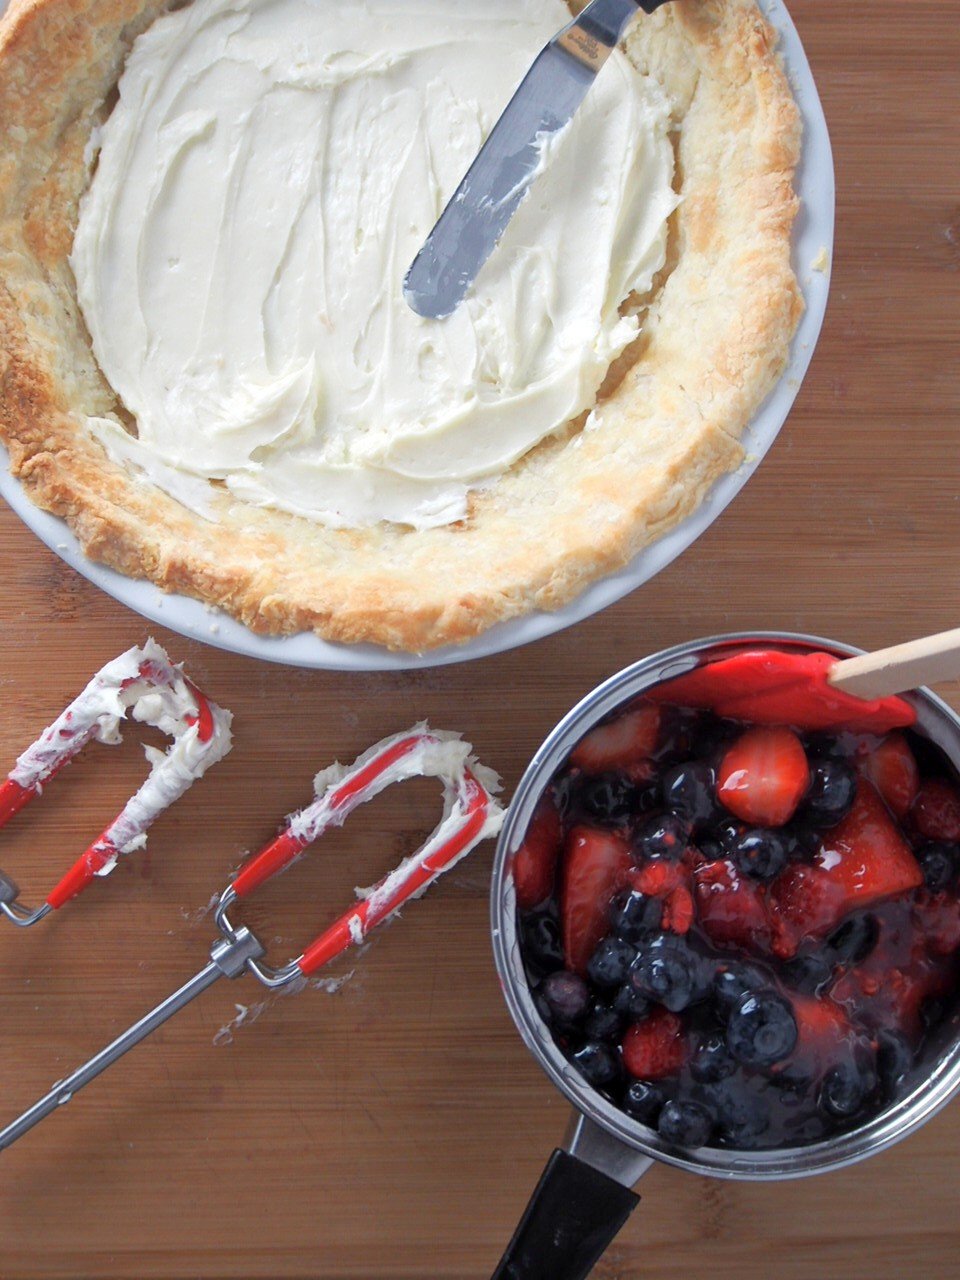 Spreading the cream cheese filling into the pie crust.